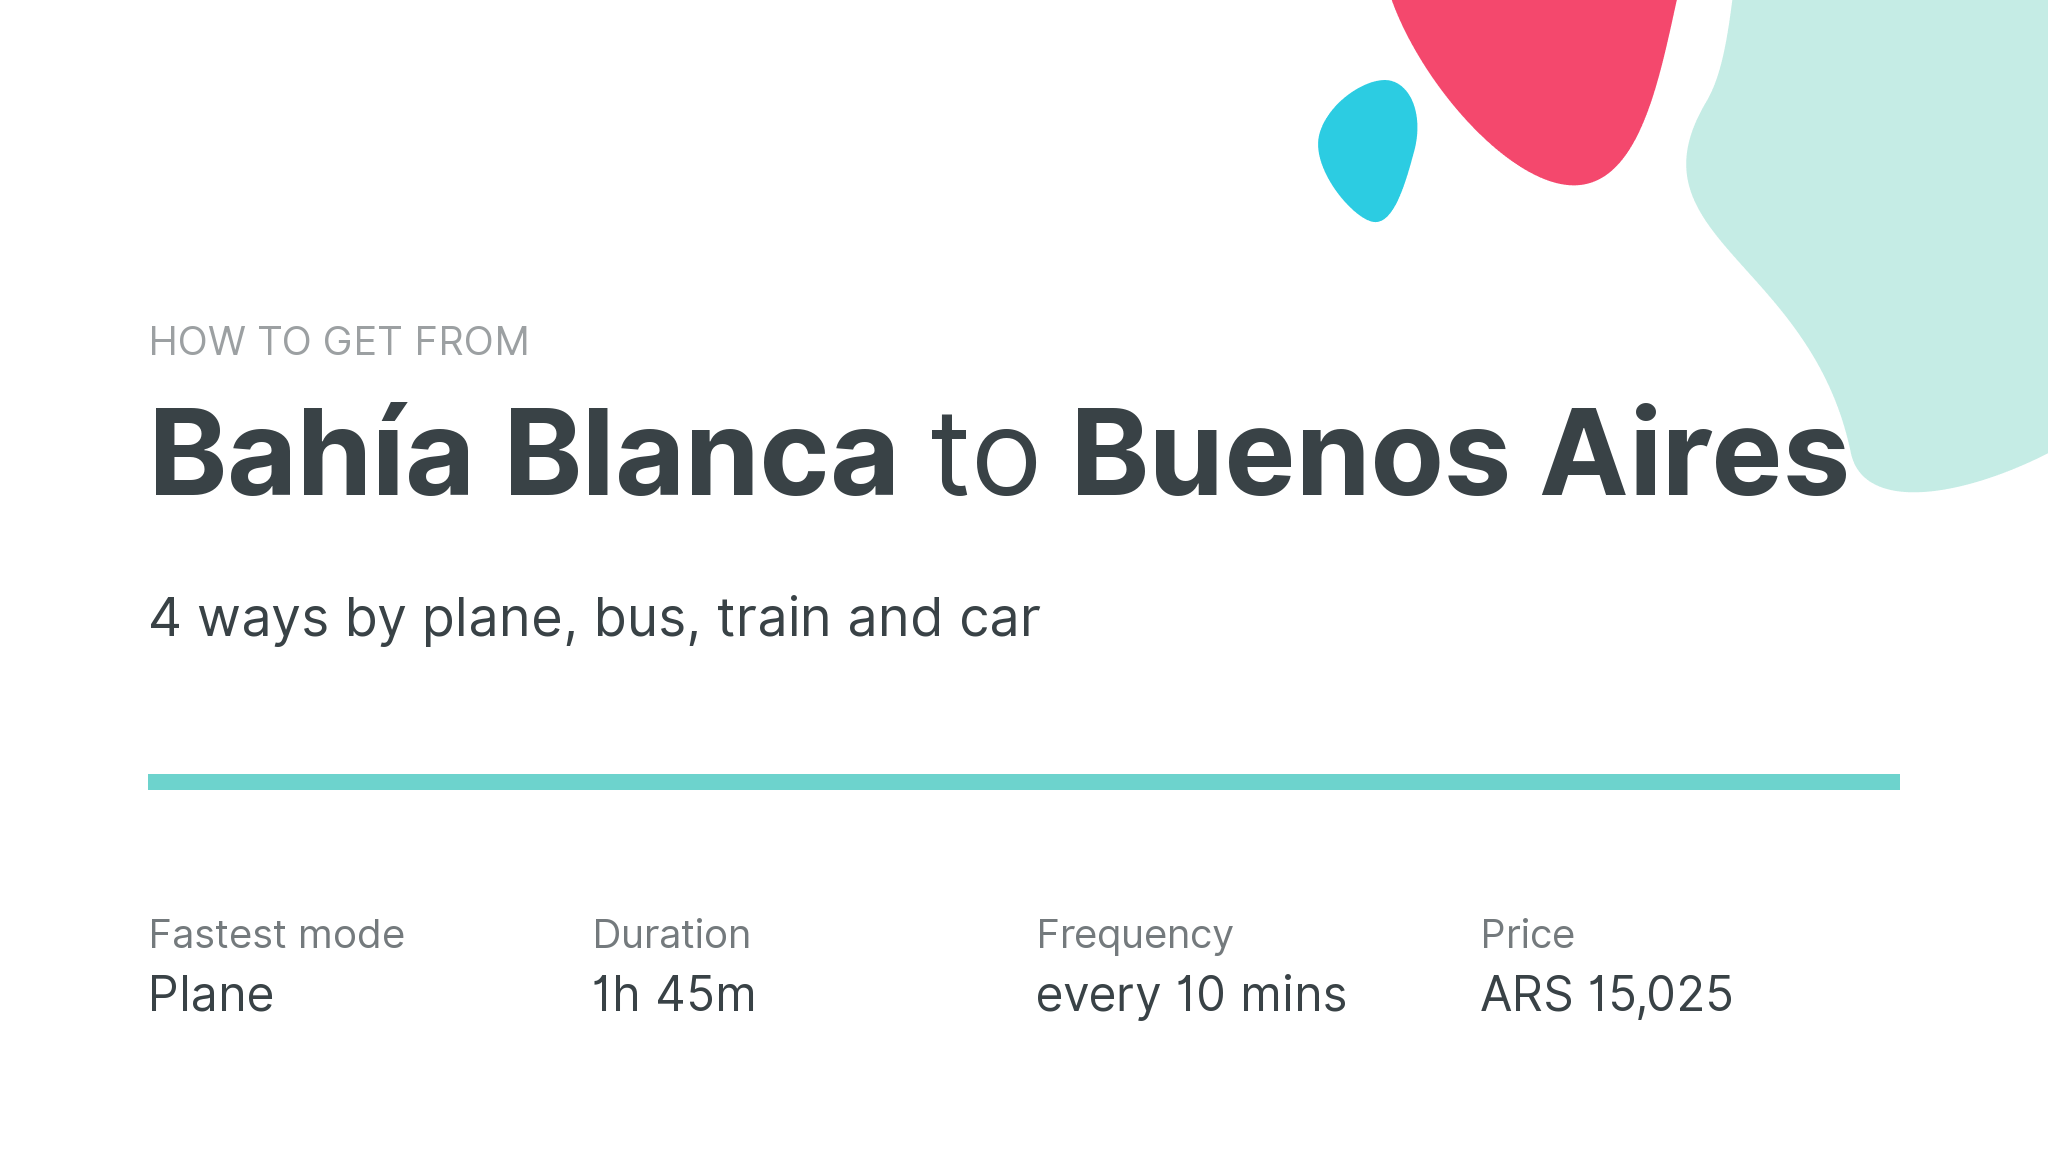 How do I get from Bahía Blanca to Buenos Aires